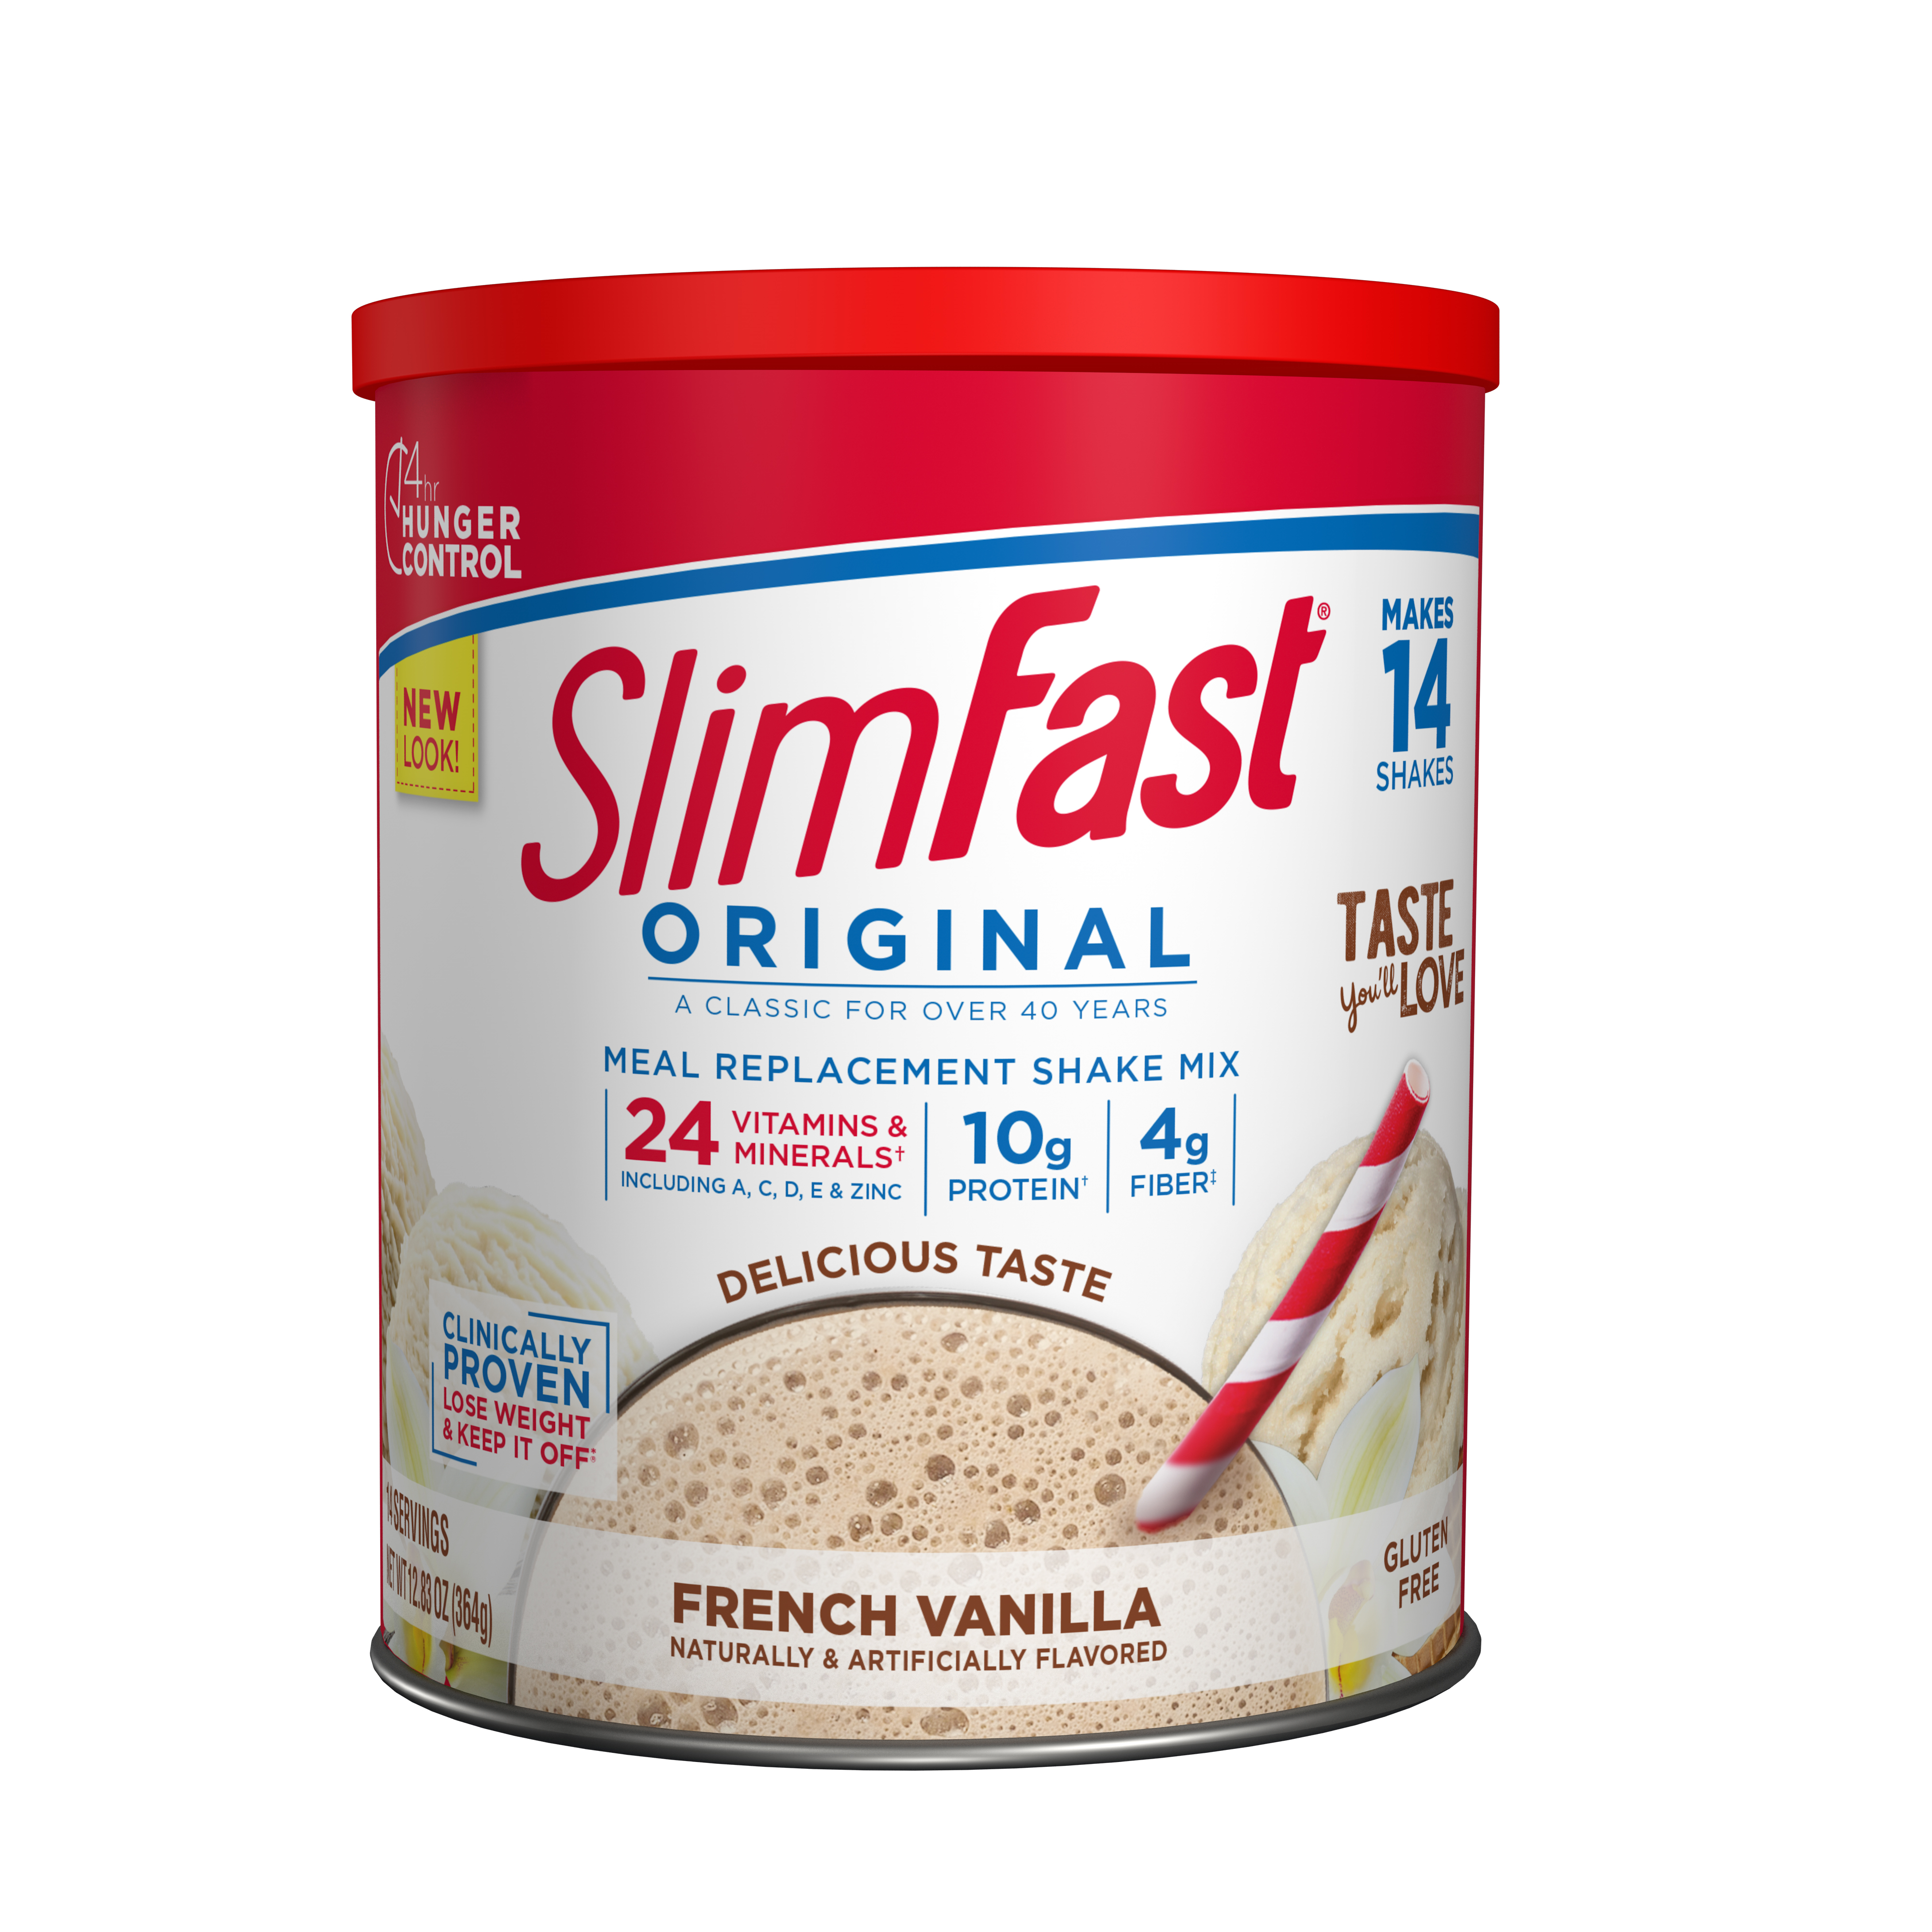 SlimFast Original Meal Replacement Shake Powder, French Vanilla, 12.83 oz, 14 servings - image 1 of 6